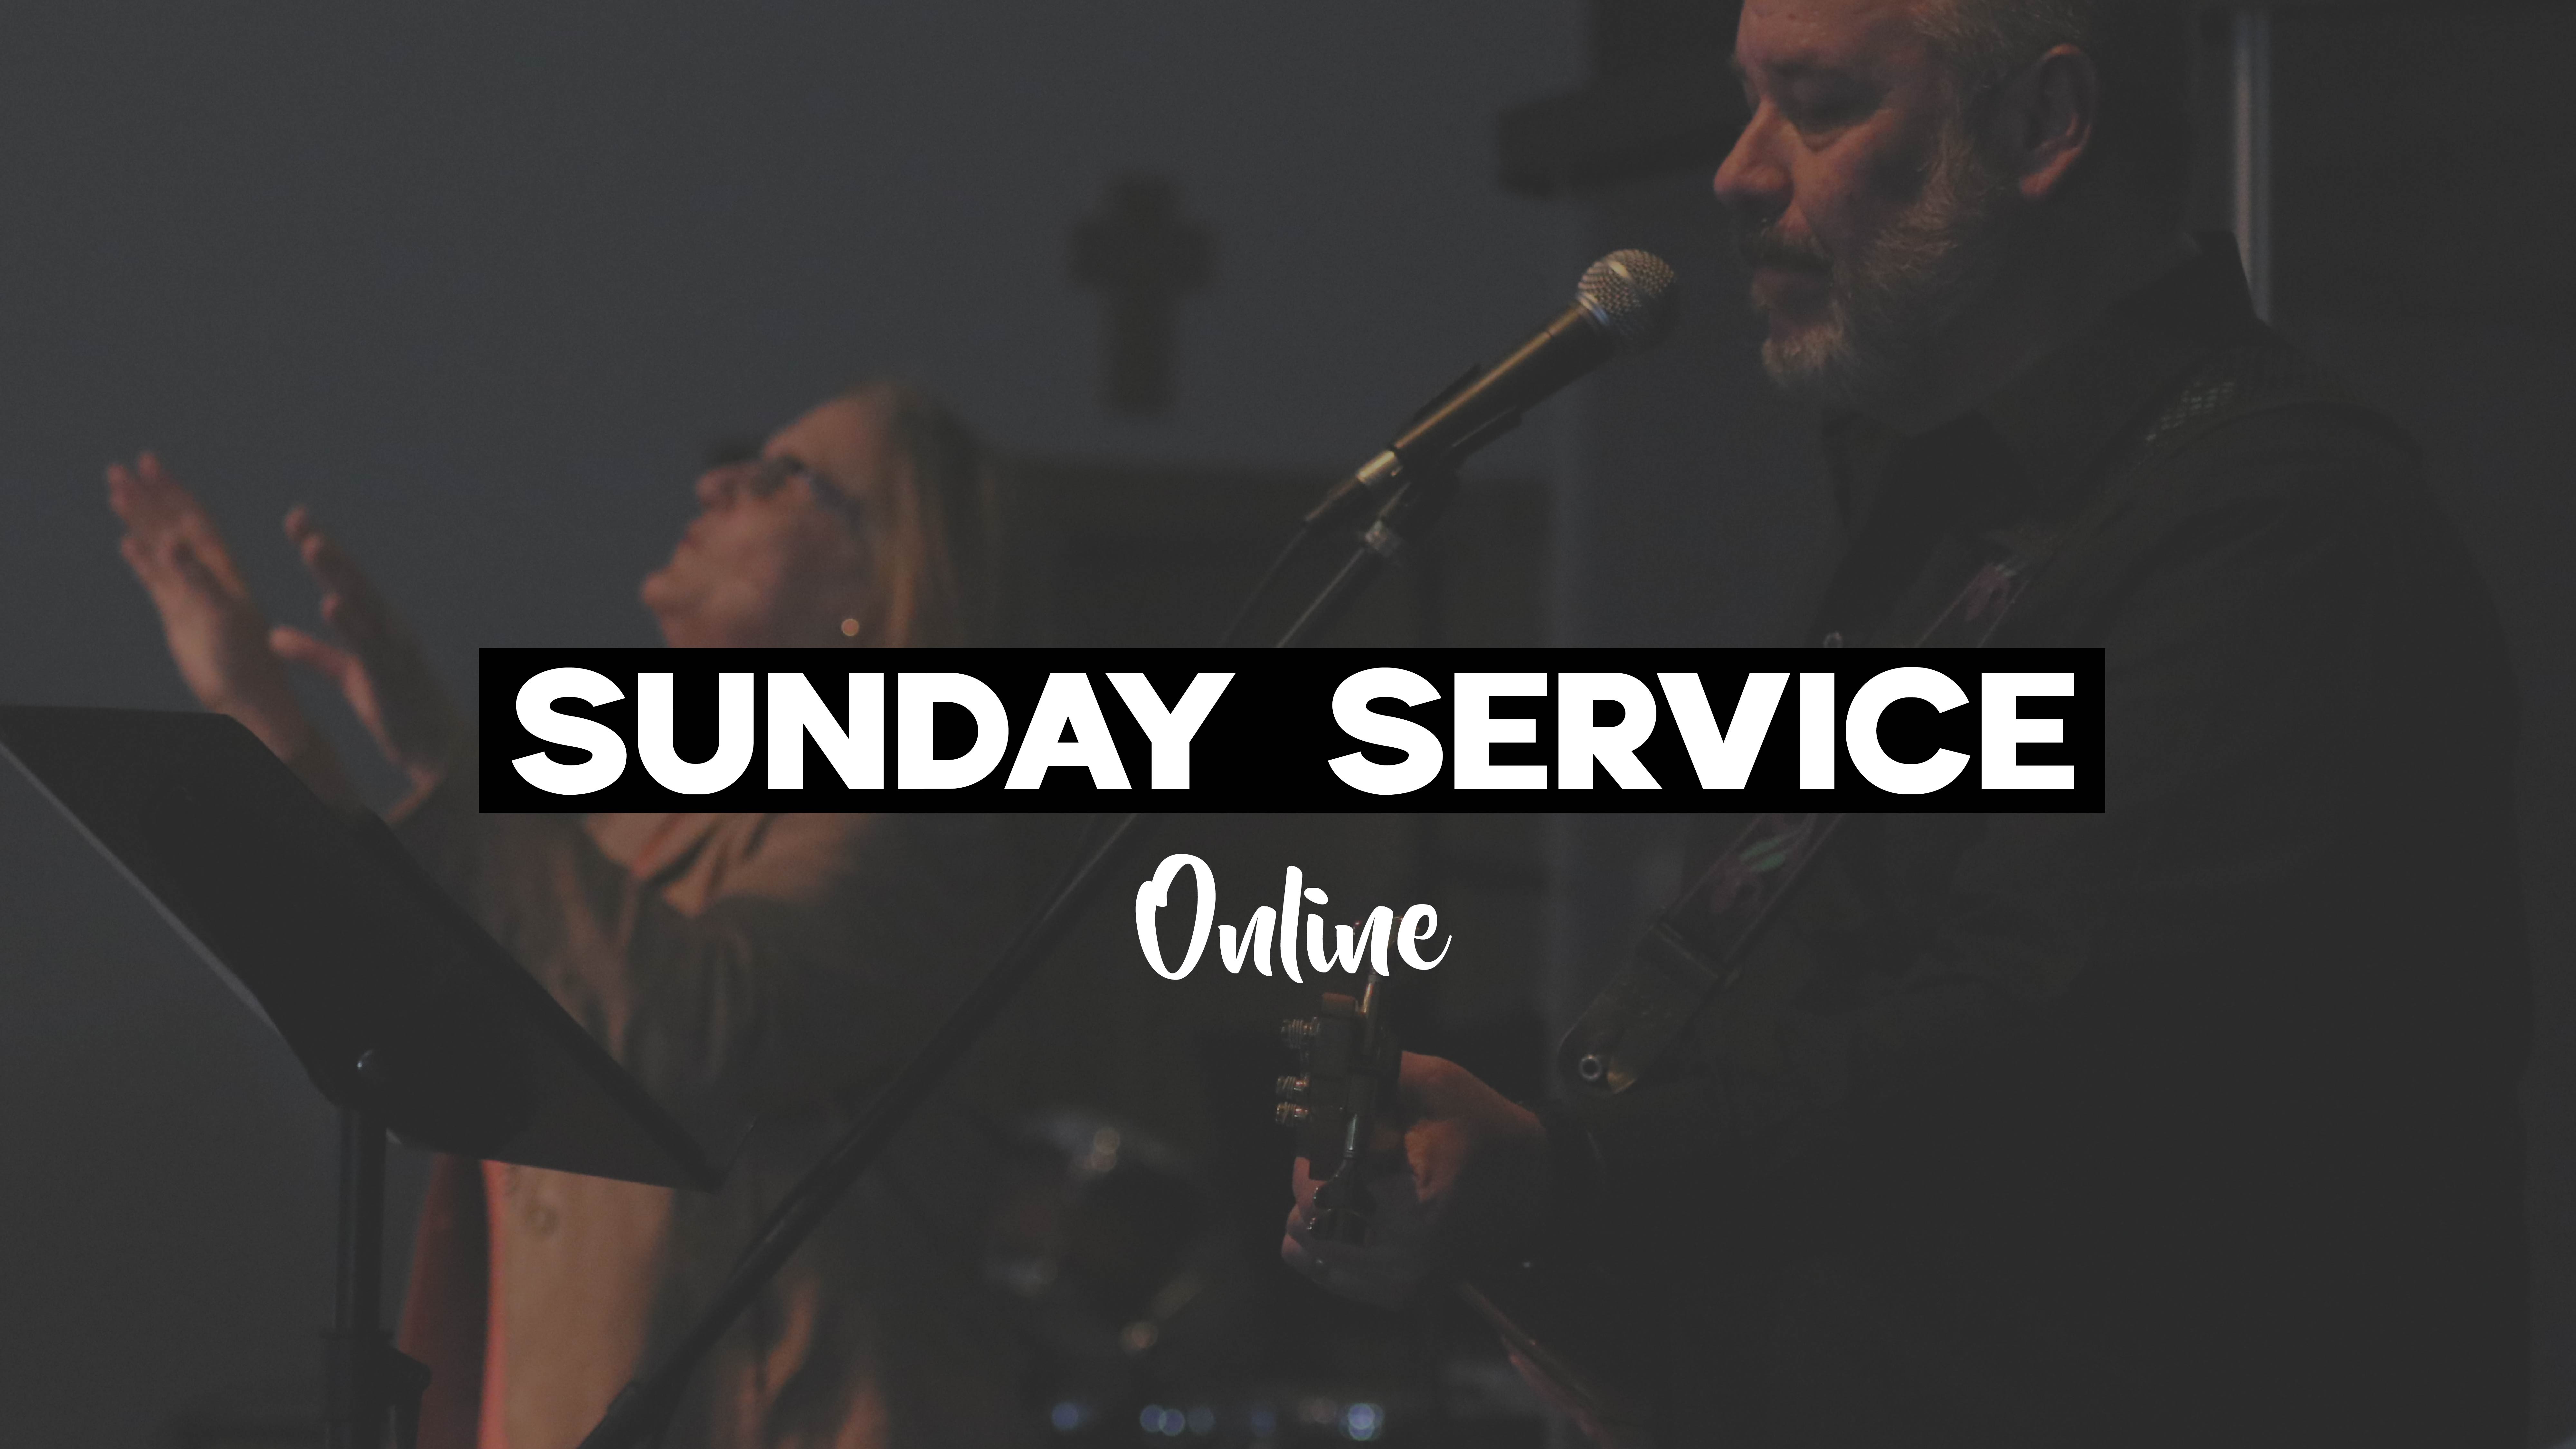 May 31st Online Service